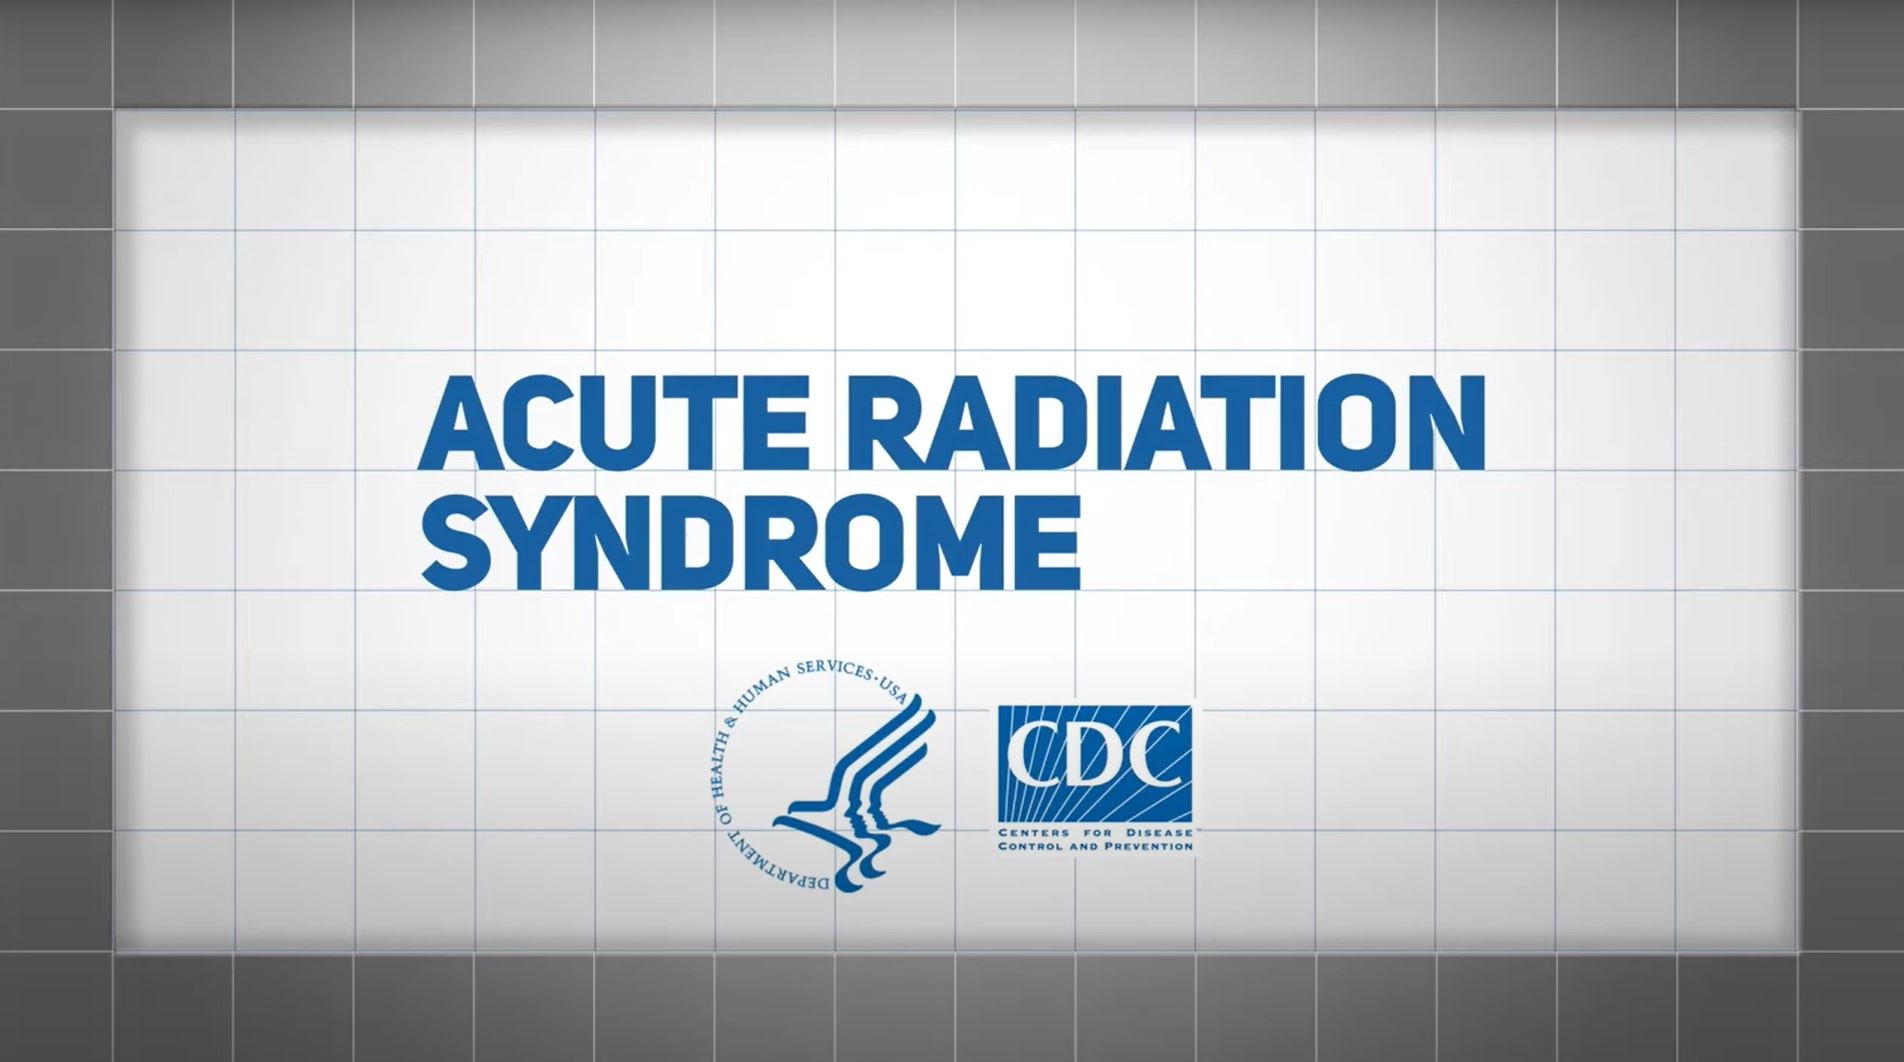 Banner displaying "Acute Radiation Syndrome" with CDC logo